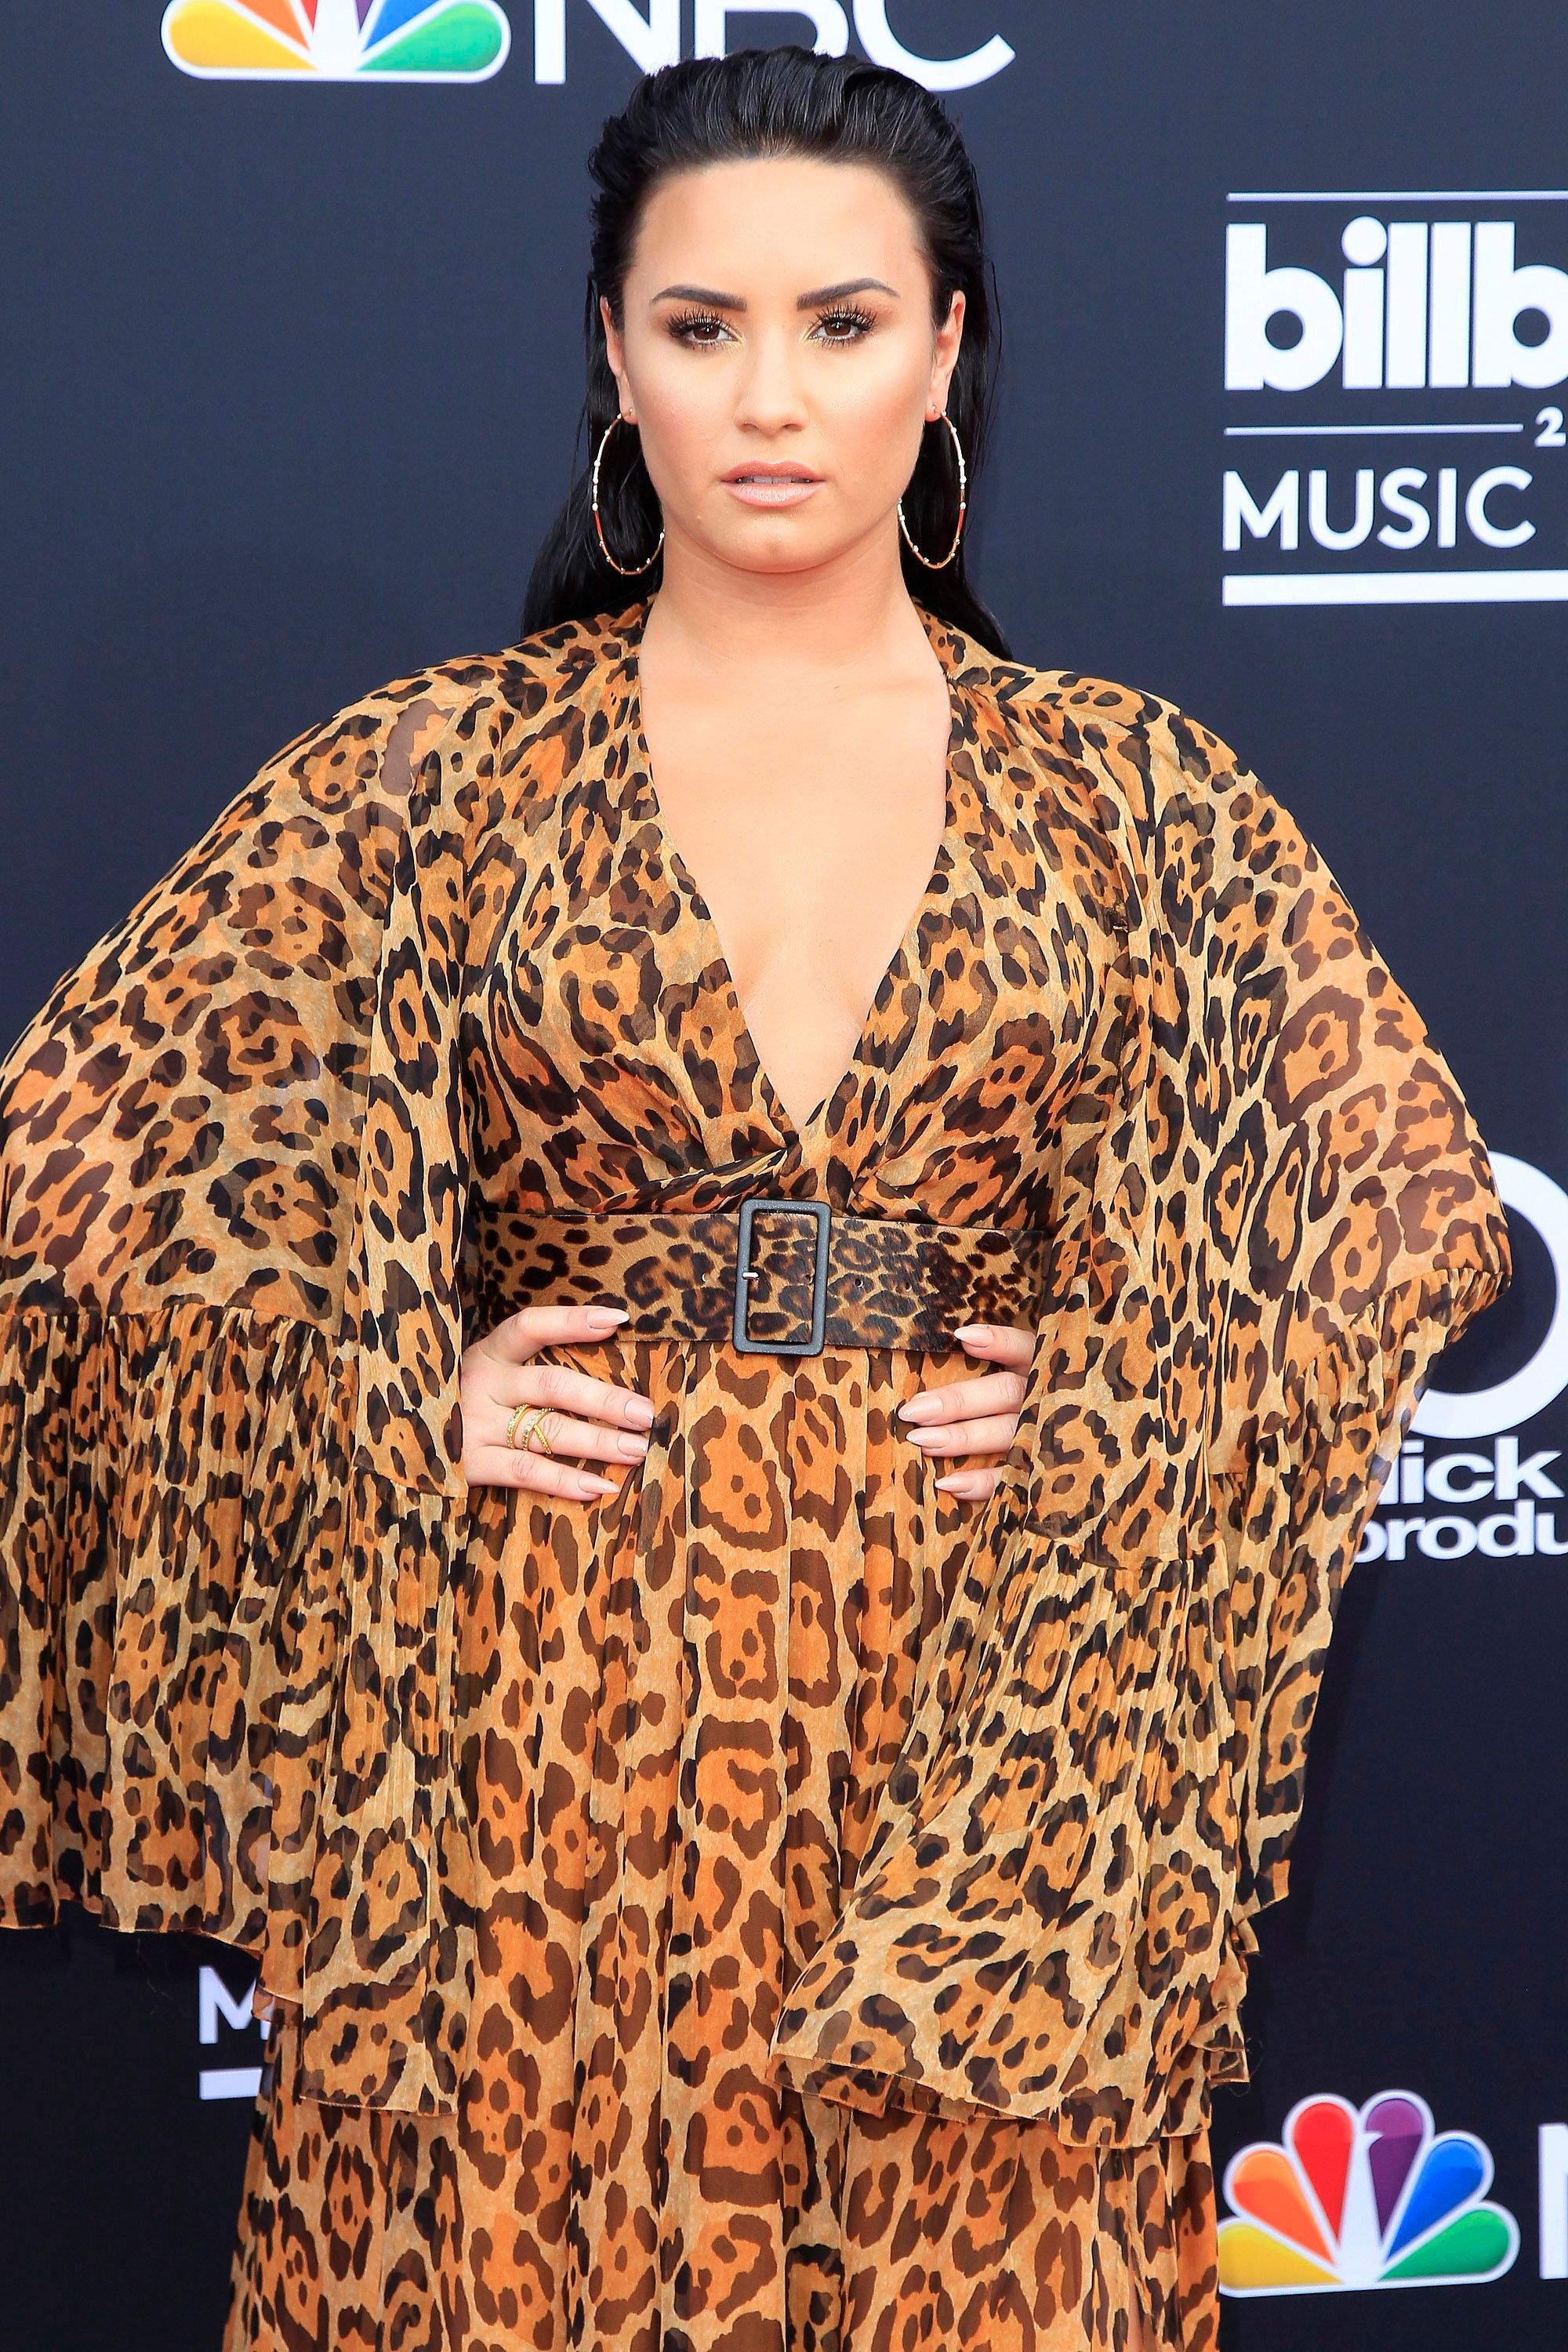 Demi Lovato Says Entertainment Industry Normalized Her Eating Disorder